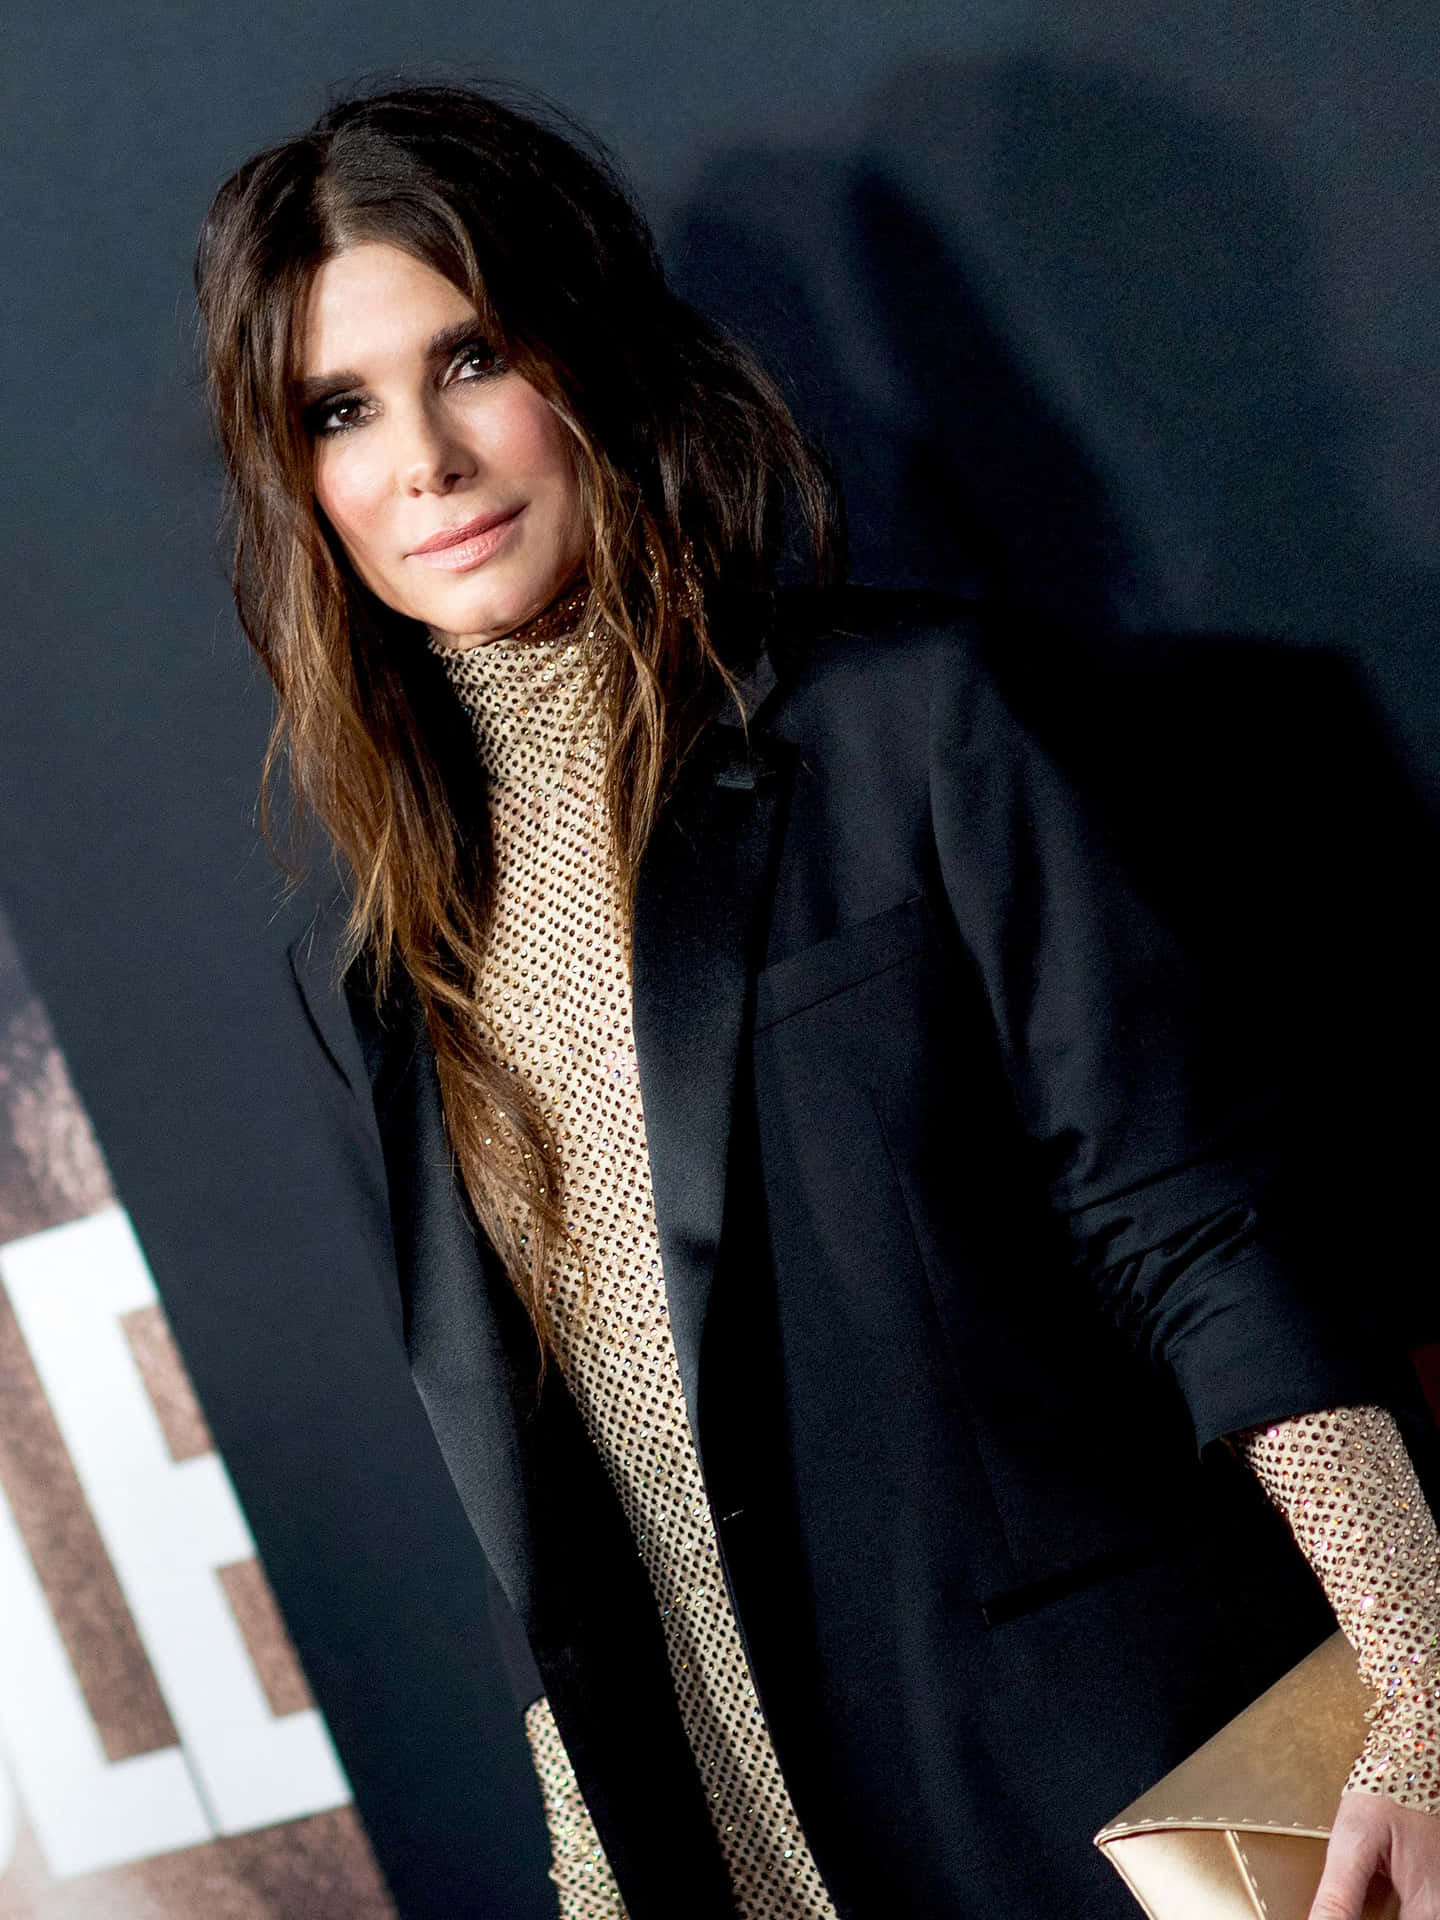 Sandra Bullock - Beautiful, Talented and Here to Stay